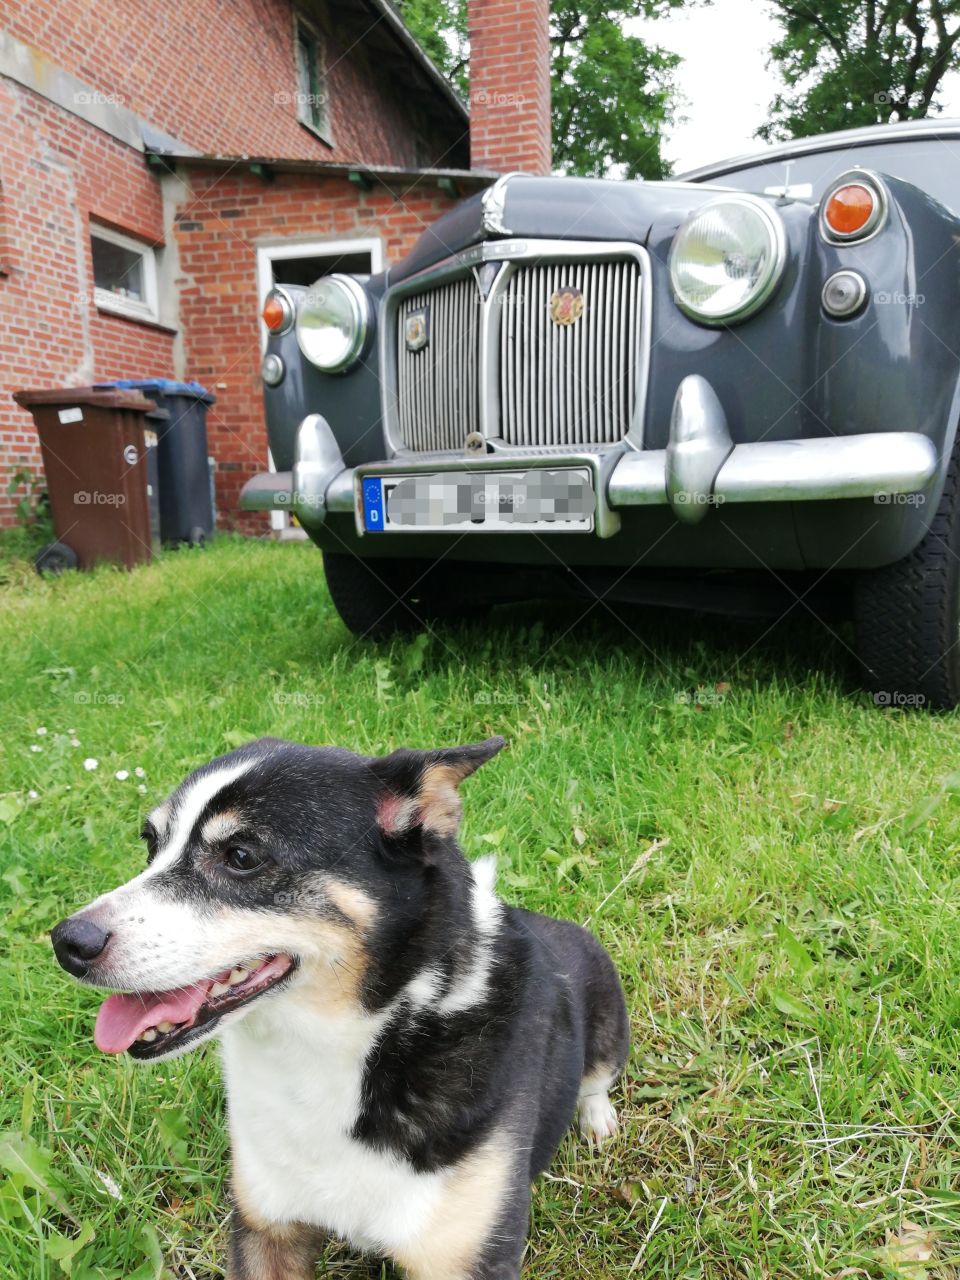 Small black and white dog in front of an oldtimer car